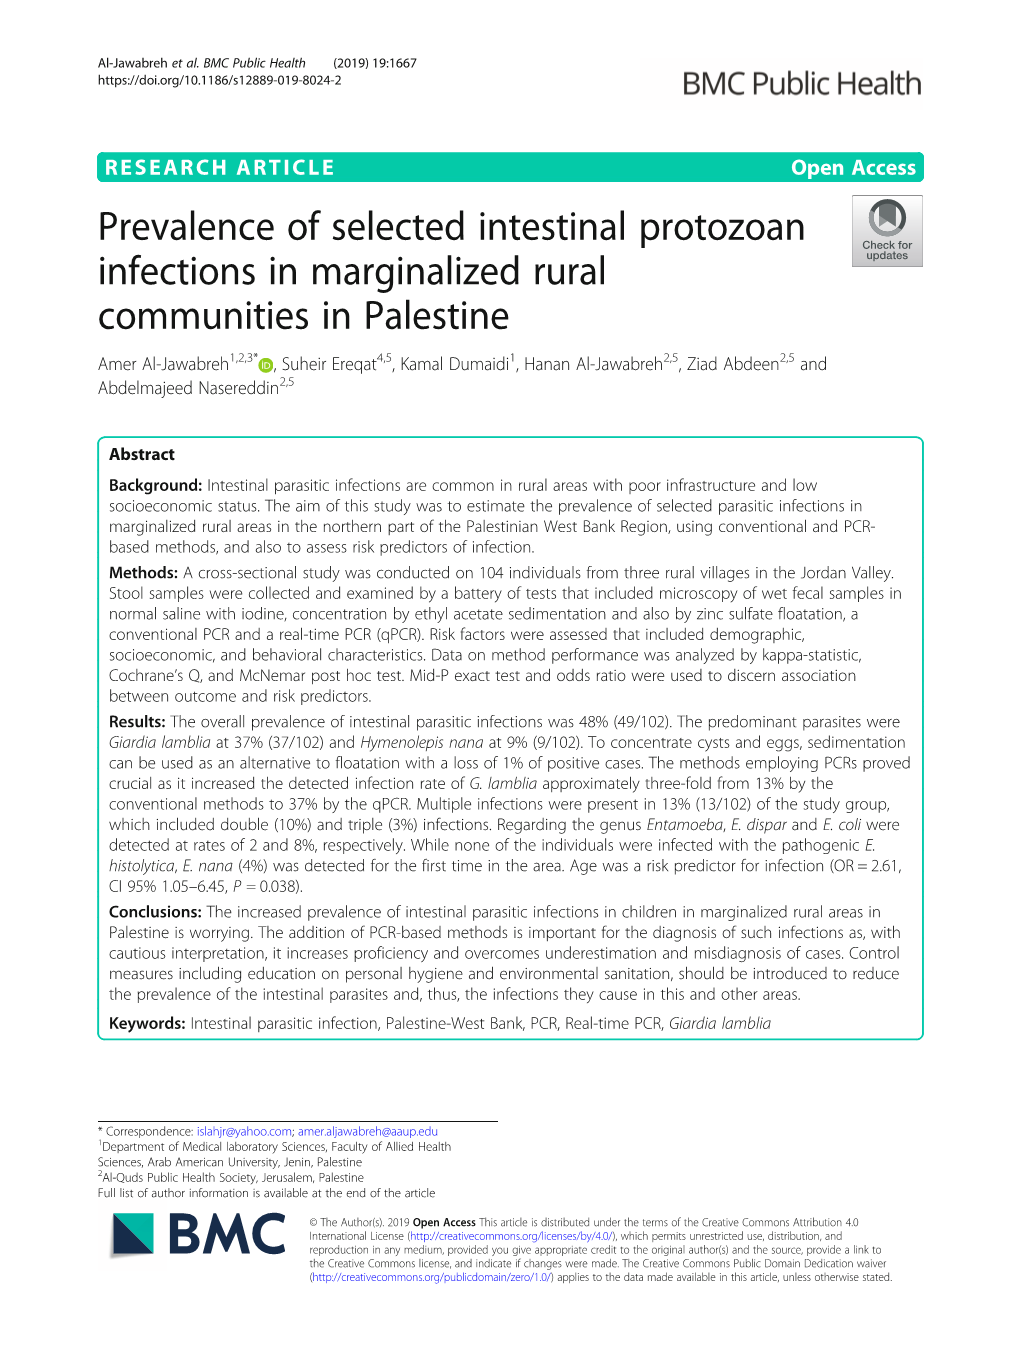 Prevalence of Selected Intestinal Protozoan Infections In